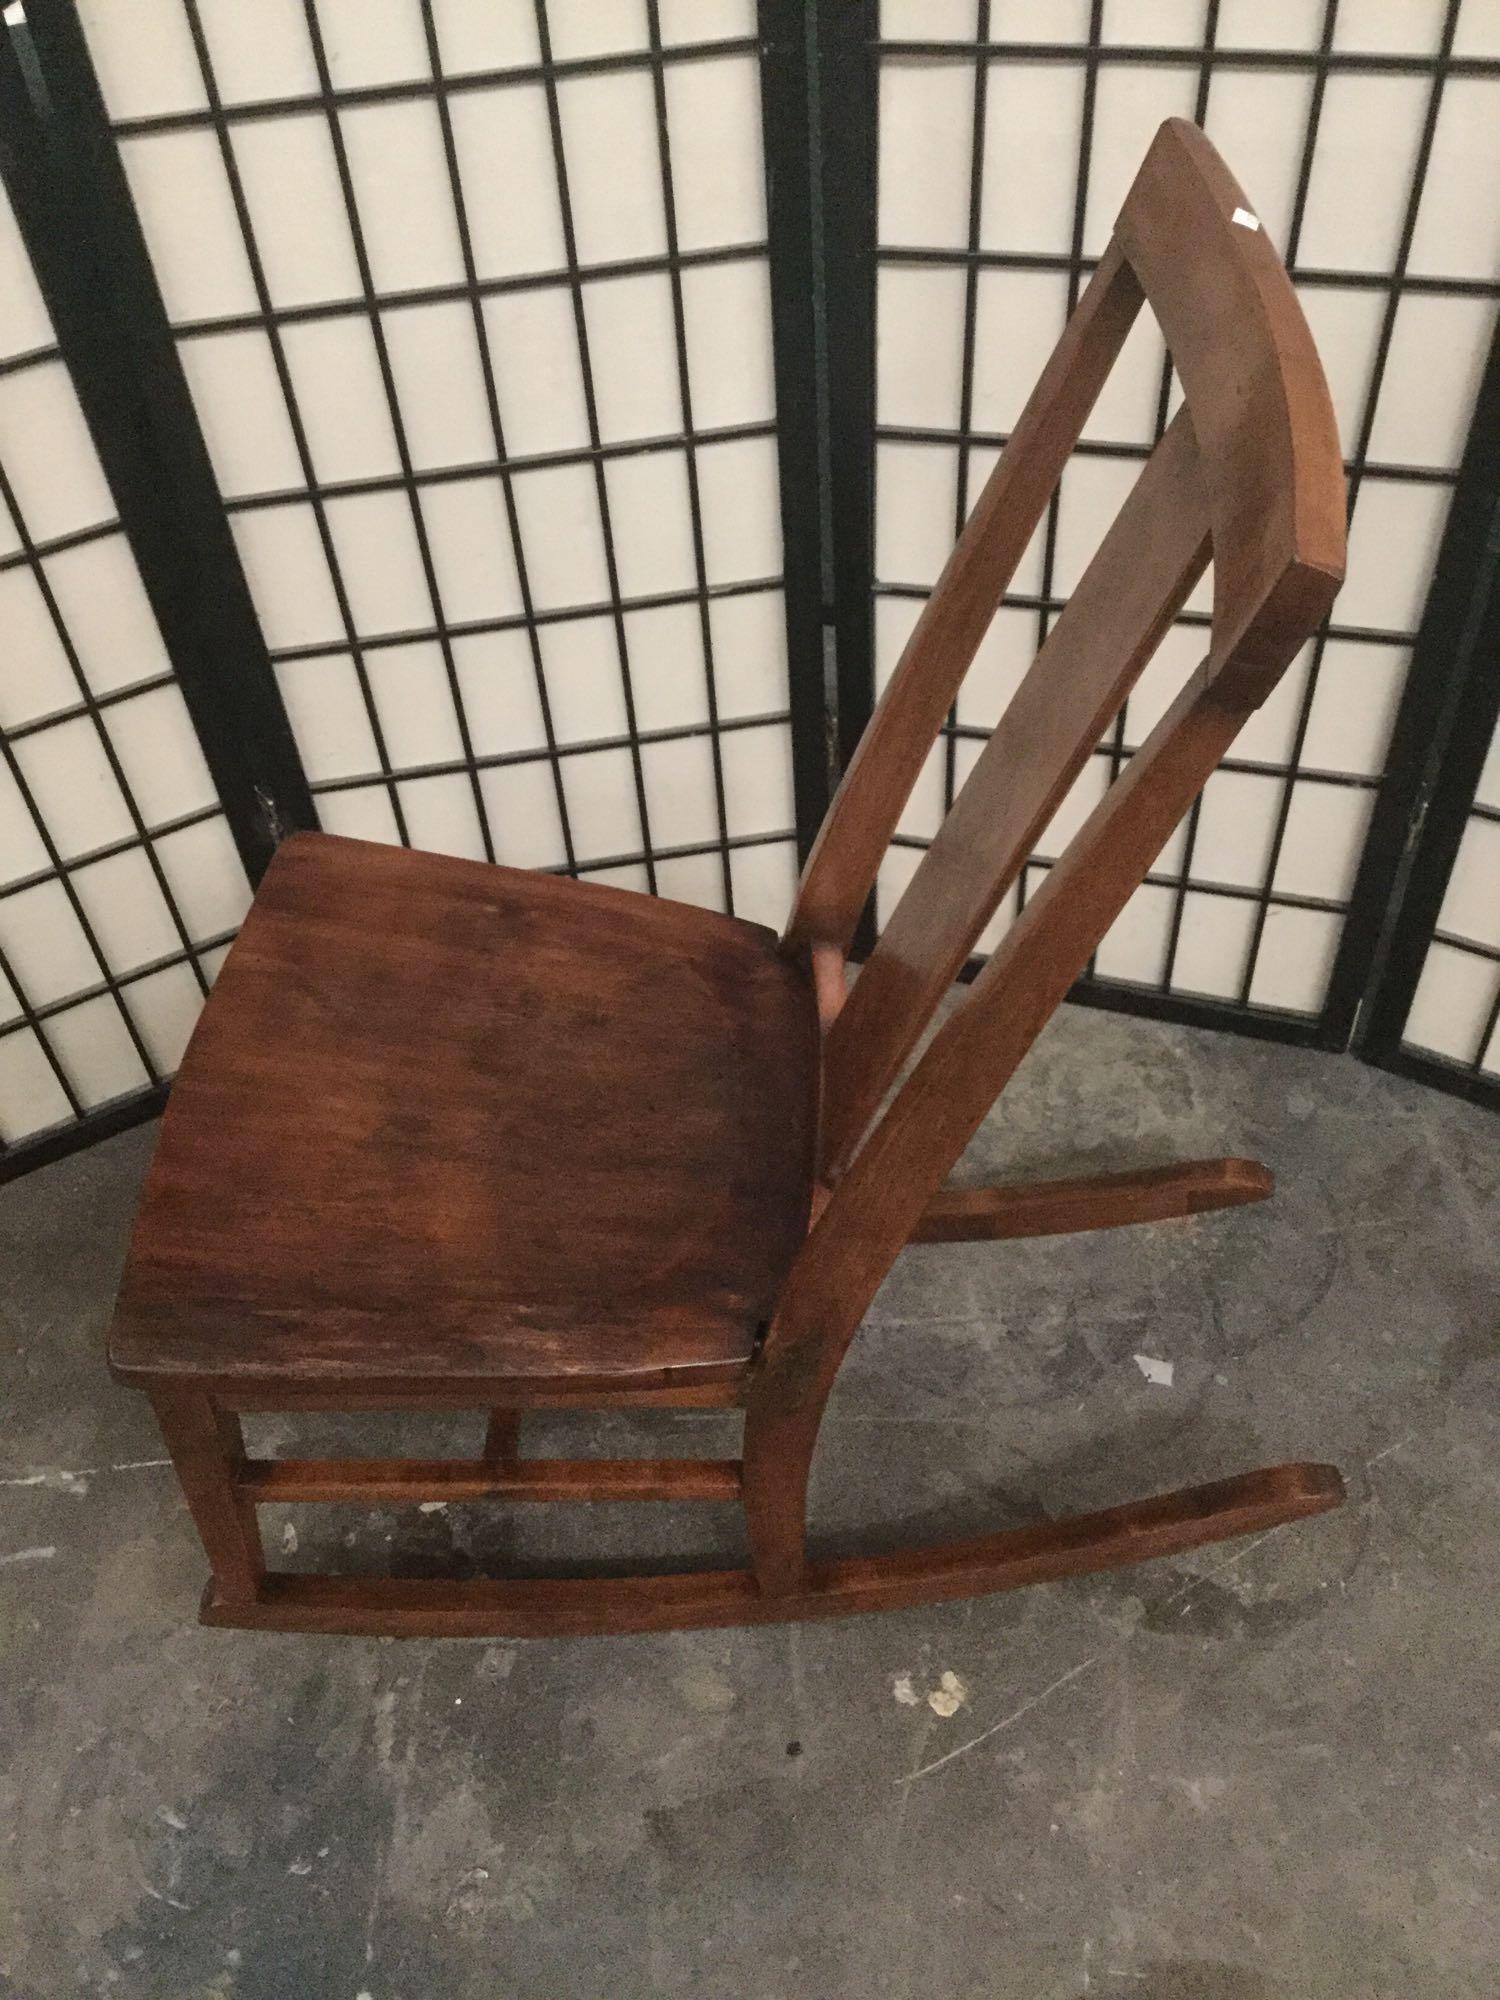 Vintage wood rocking chair, approximately 17 x 29 x 33 inches